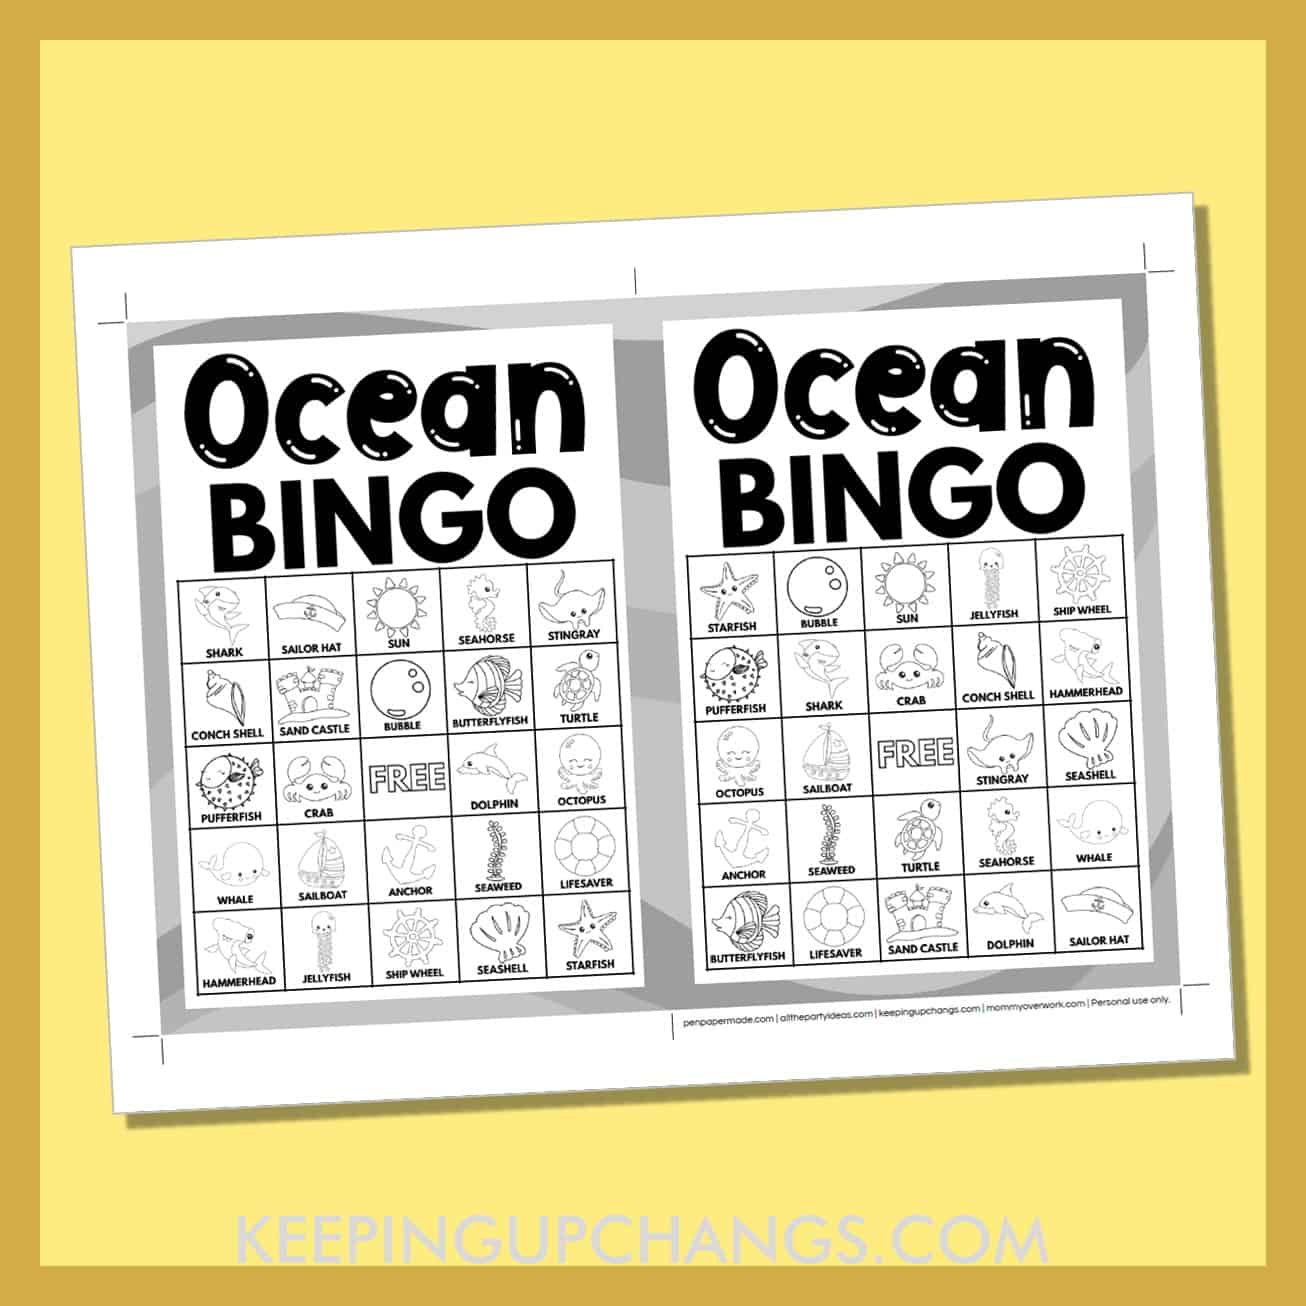 free ocean bingo card 5x5 5x7 game boards with black, white images and text words.